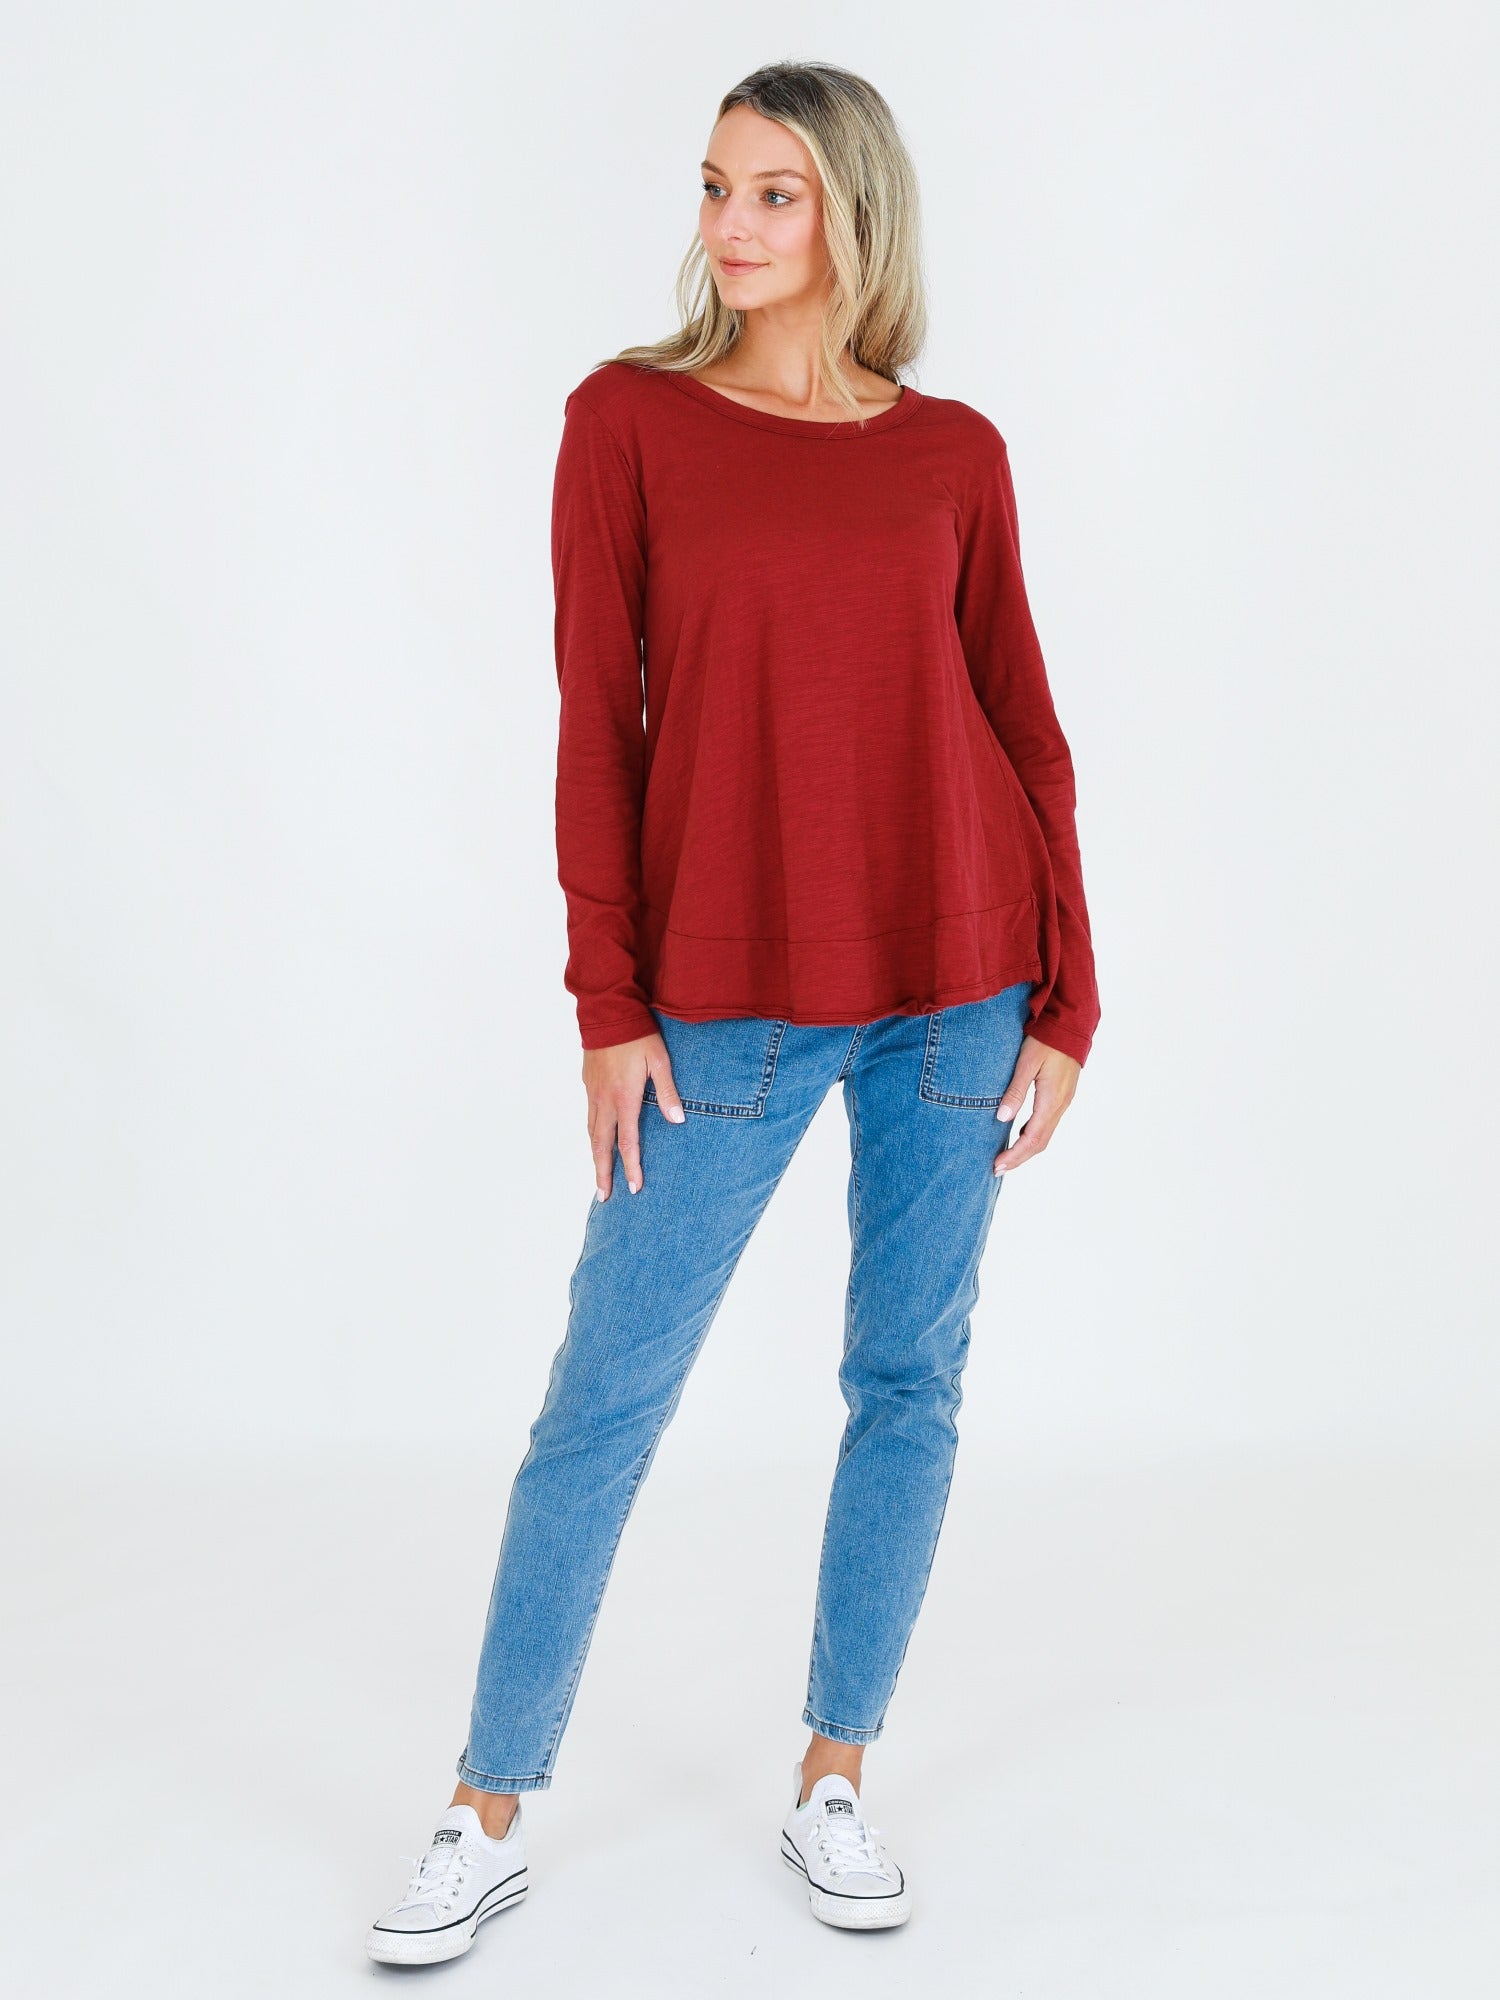 red shirt womens #color_burgundy